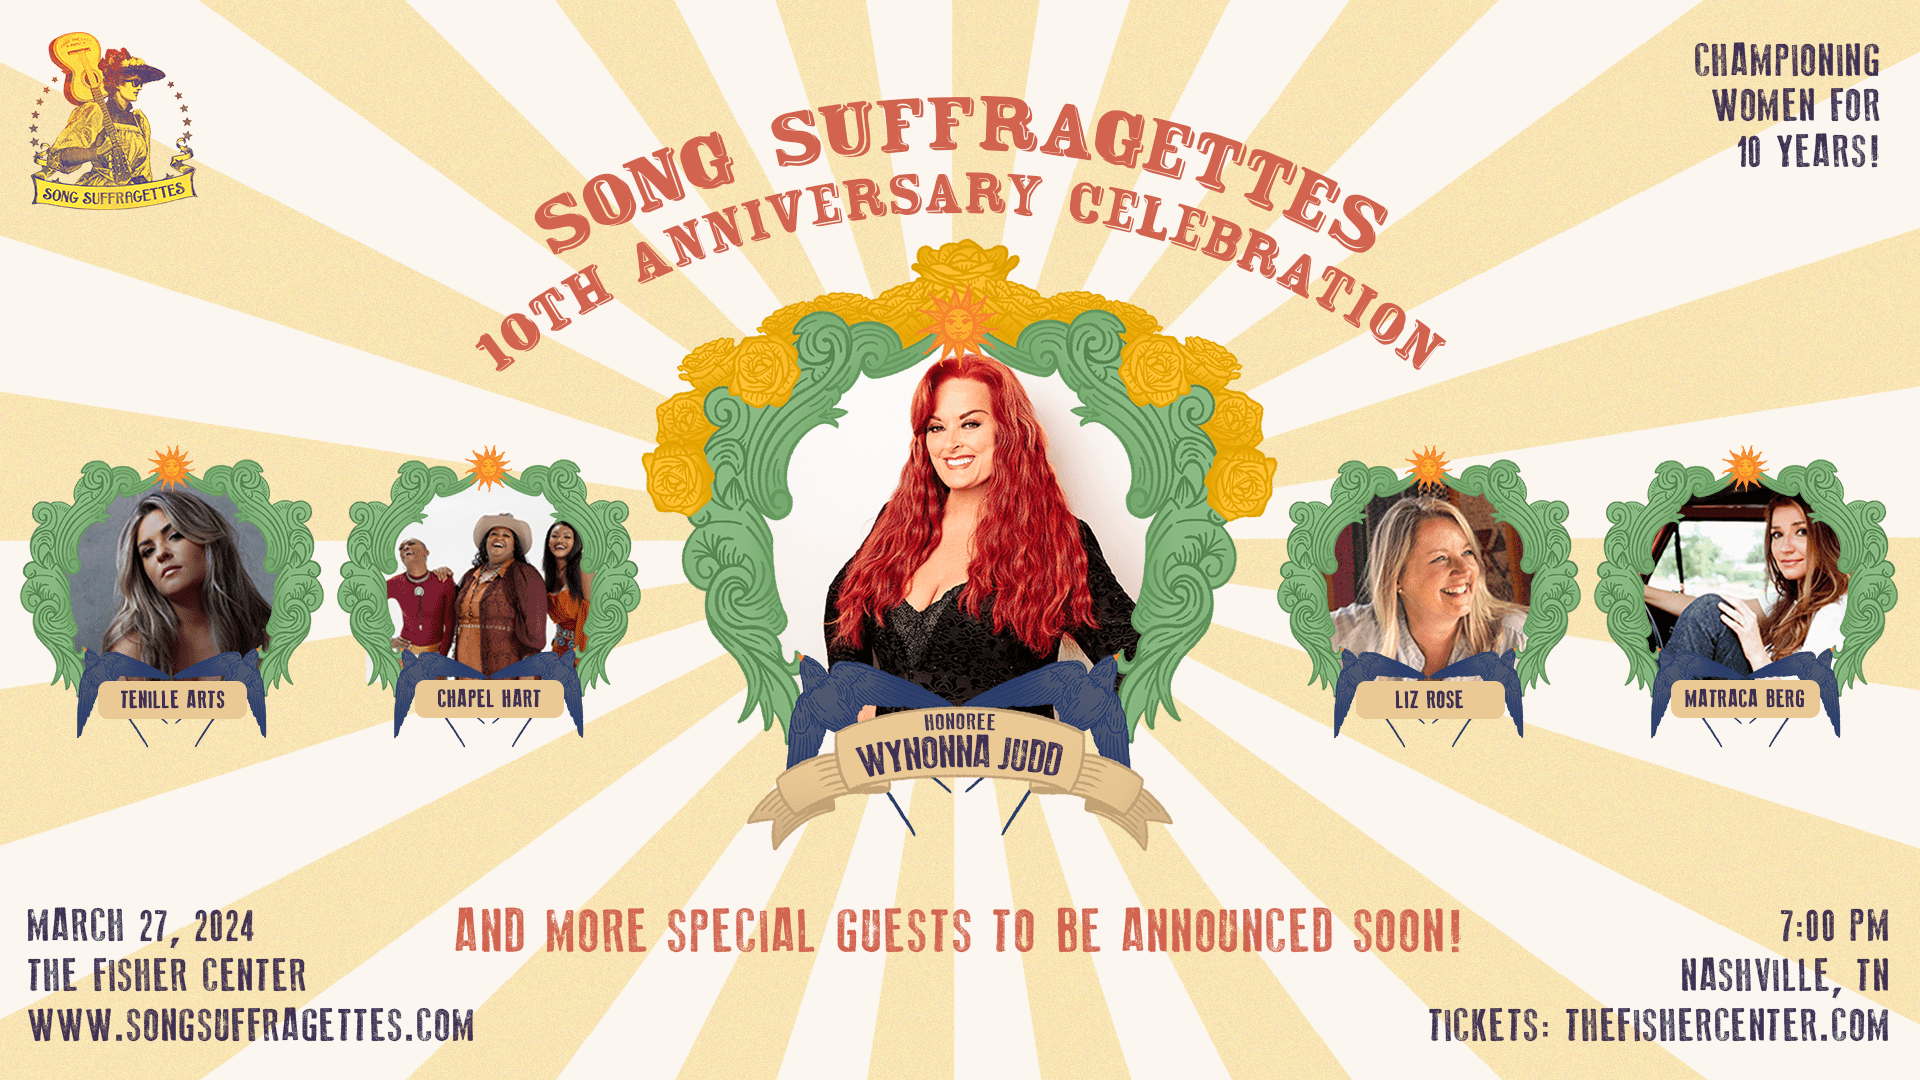 An Evening of Music celebrating the 10th Anniversary of Nashville's only all-female showcase - Song Suffragettes. Honoring Wynonna Judd featuring a performance and Q&A with the Grammy winning music icon - all with surprise guests!